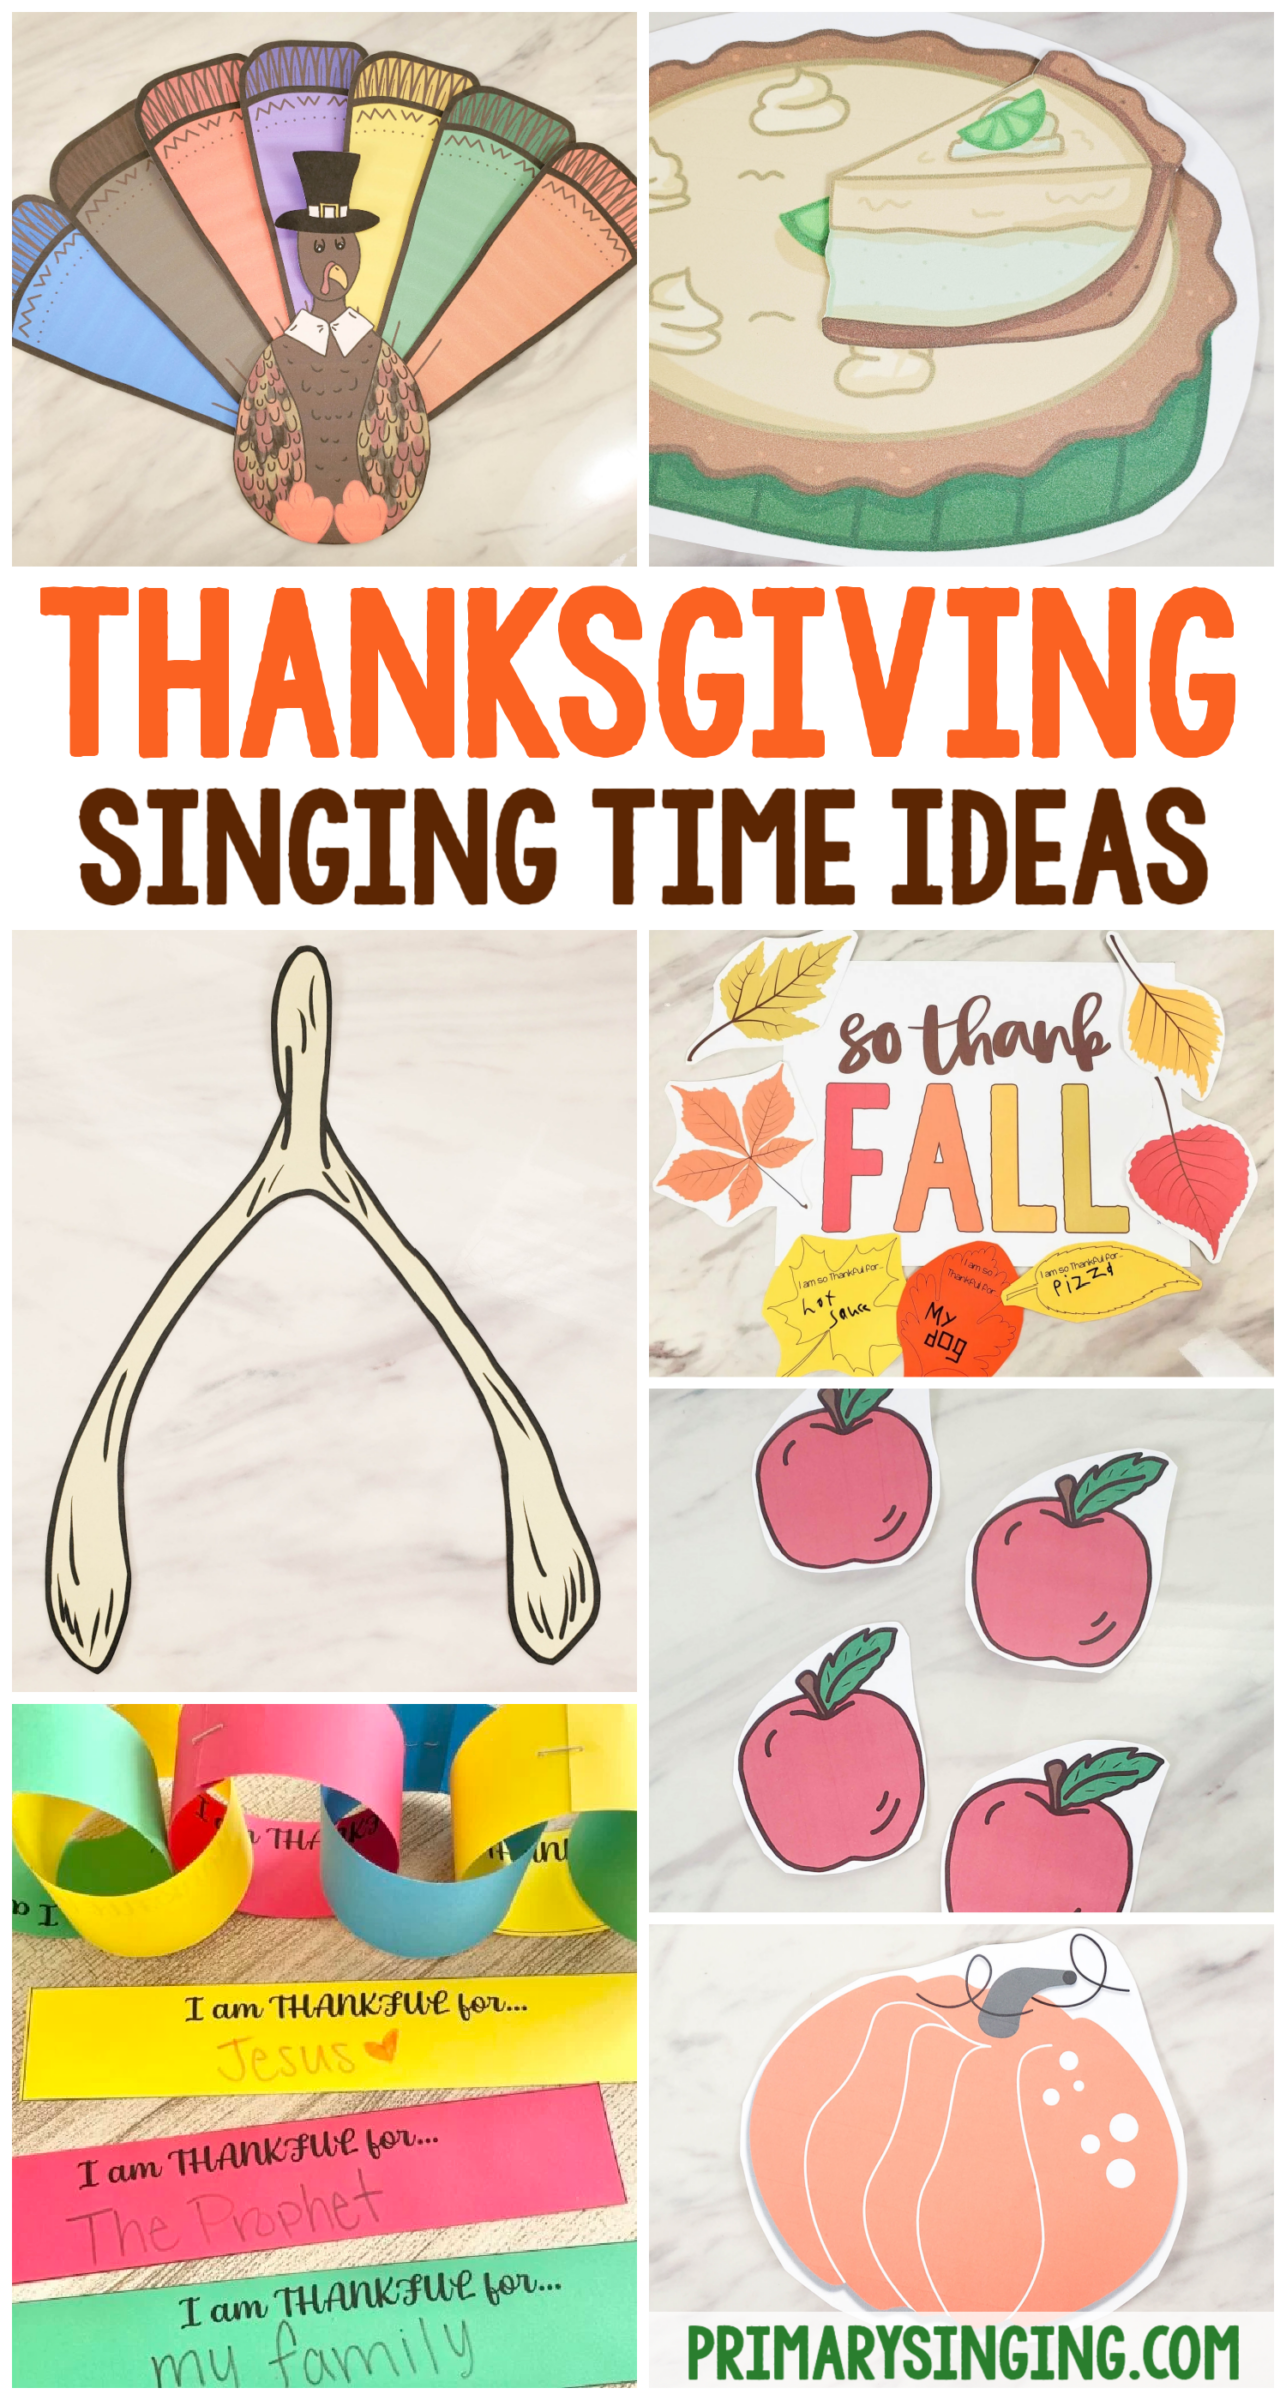 Thanksgiving Singing Time ideas so many fun activities and ideas to teach about gratitude and a thankful heart this November in your Primary! A resource list of lots of different activities for LDS Primary music leaders and teachers. Including break a turkey wishbone, so thank-fall leaves, build a thankful turkey full of colorful feathers, pick a thanksgiving pie slice or pie face game and many others!